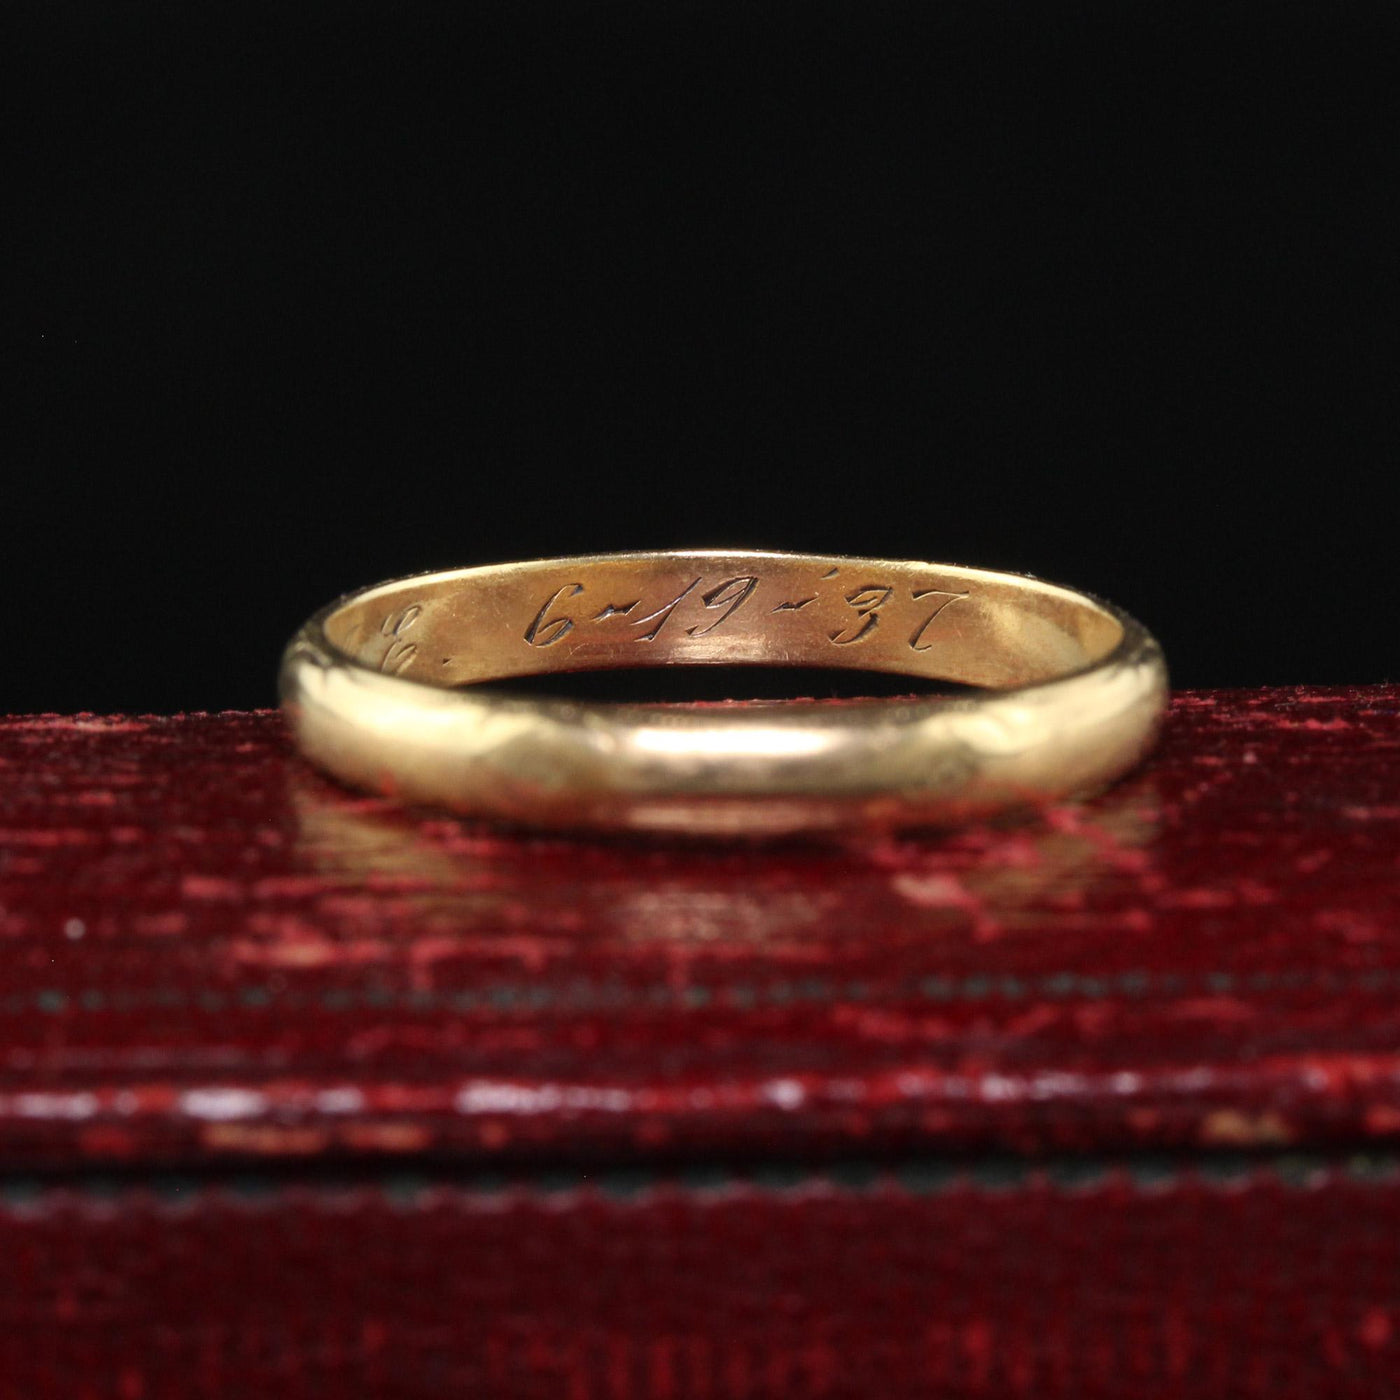 Antique Art Deco 14K Yellow Gold Engraved Wedding Band - Size 10